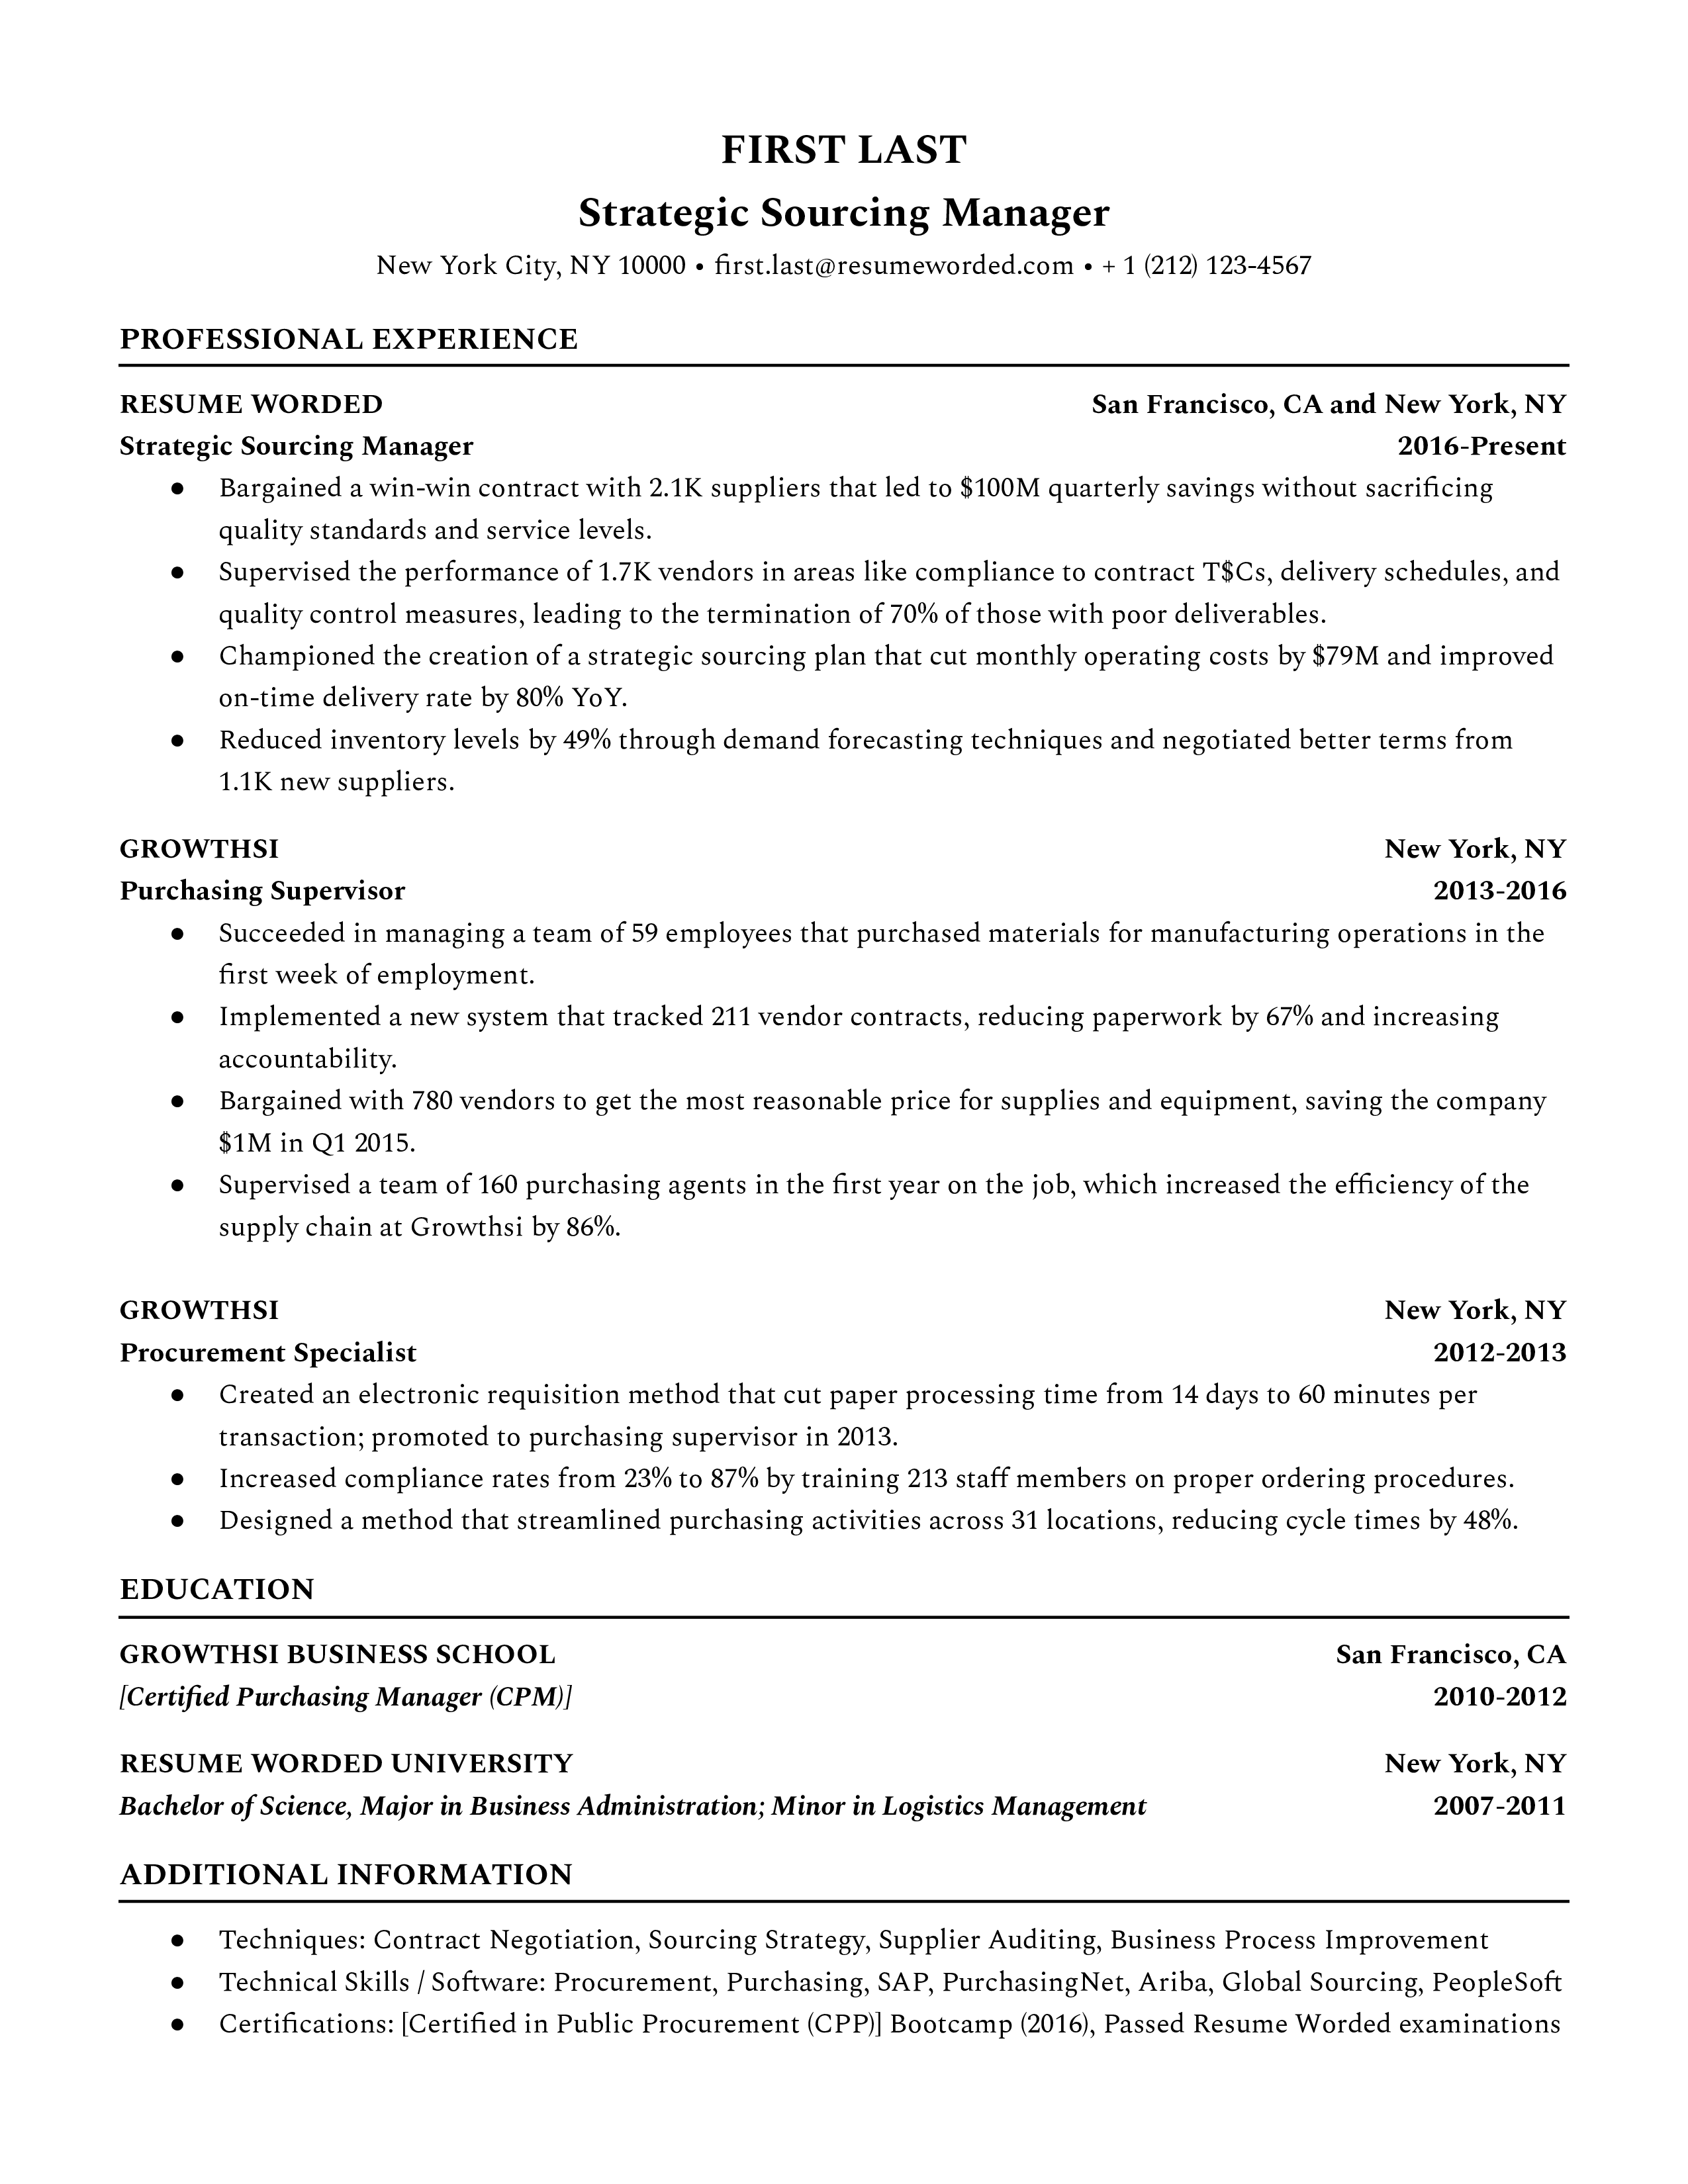 A strategic sourcing manager resume template that highlights professional experience